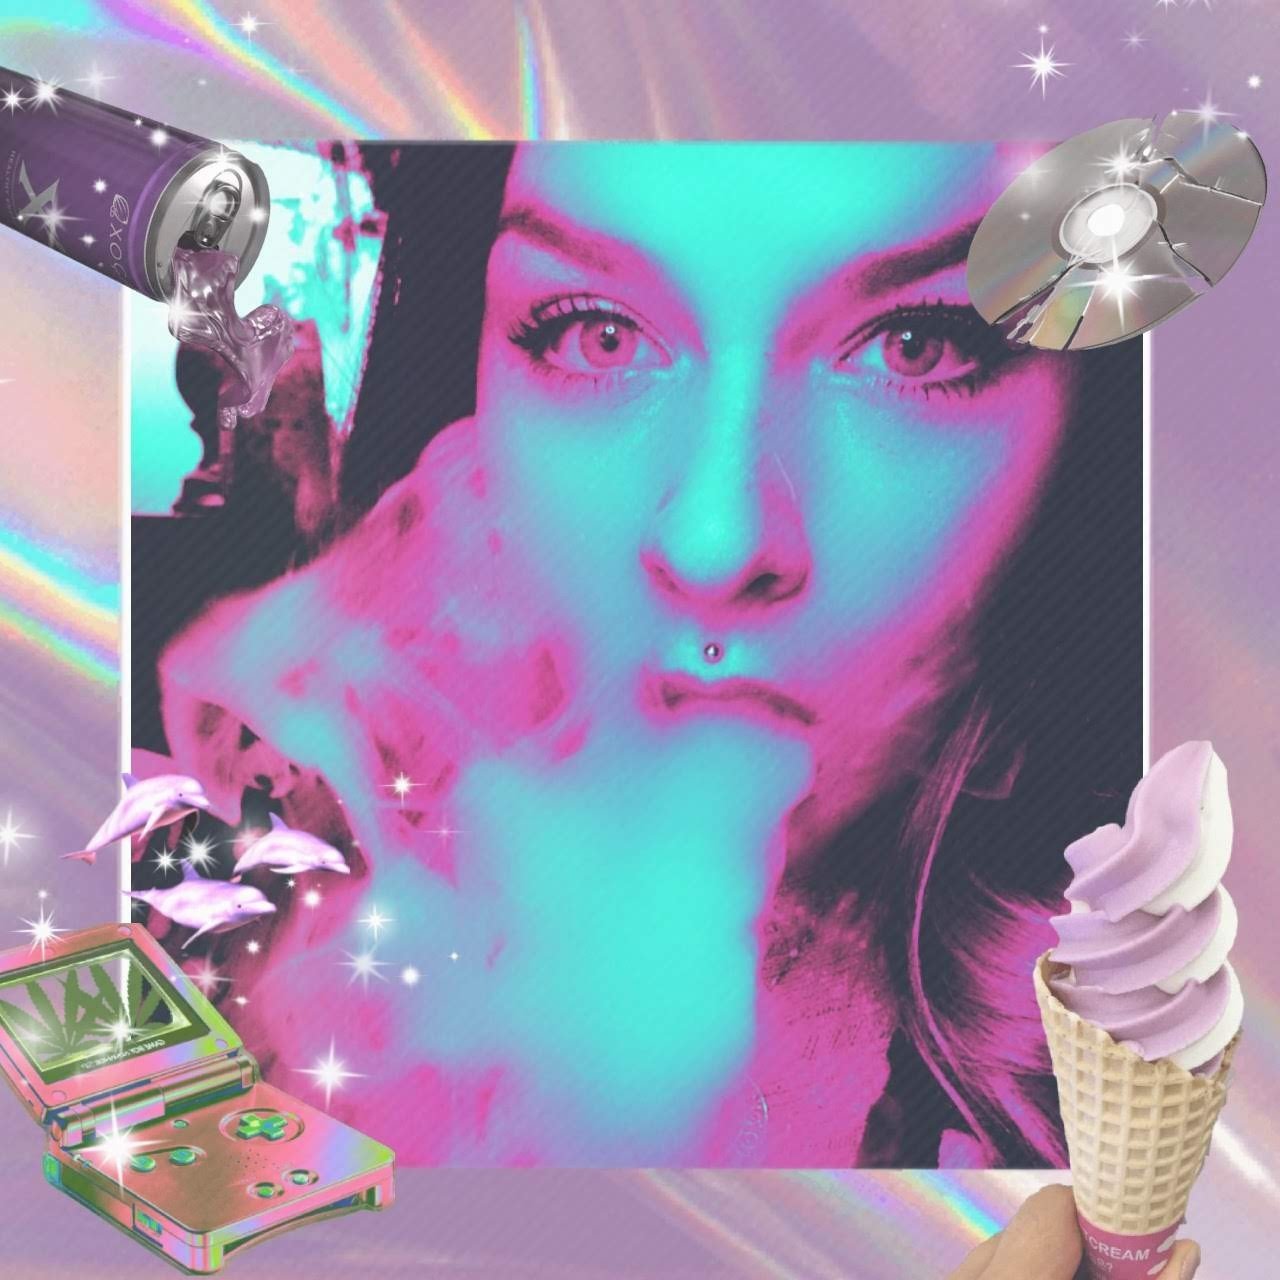 Photo by Goddess Freyja with the username @extrathiccdomme, who is a star user,  December 12, 2019 at 9:22 PM. The post is about the topic Vaporwave and the text says 'Missing those Vaporwave days
I can't get enough 😏'